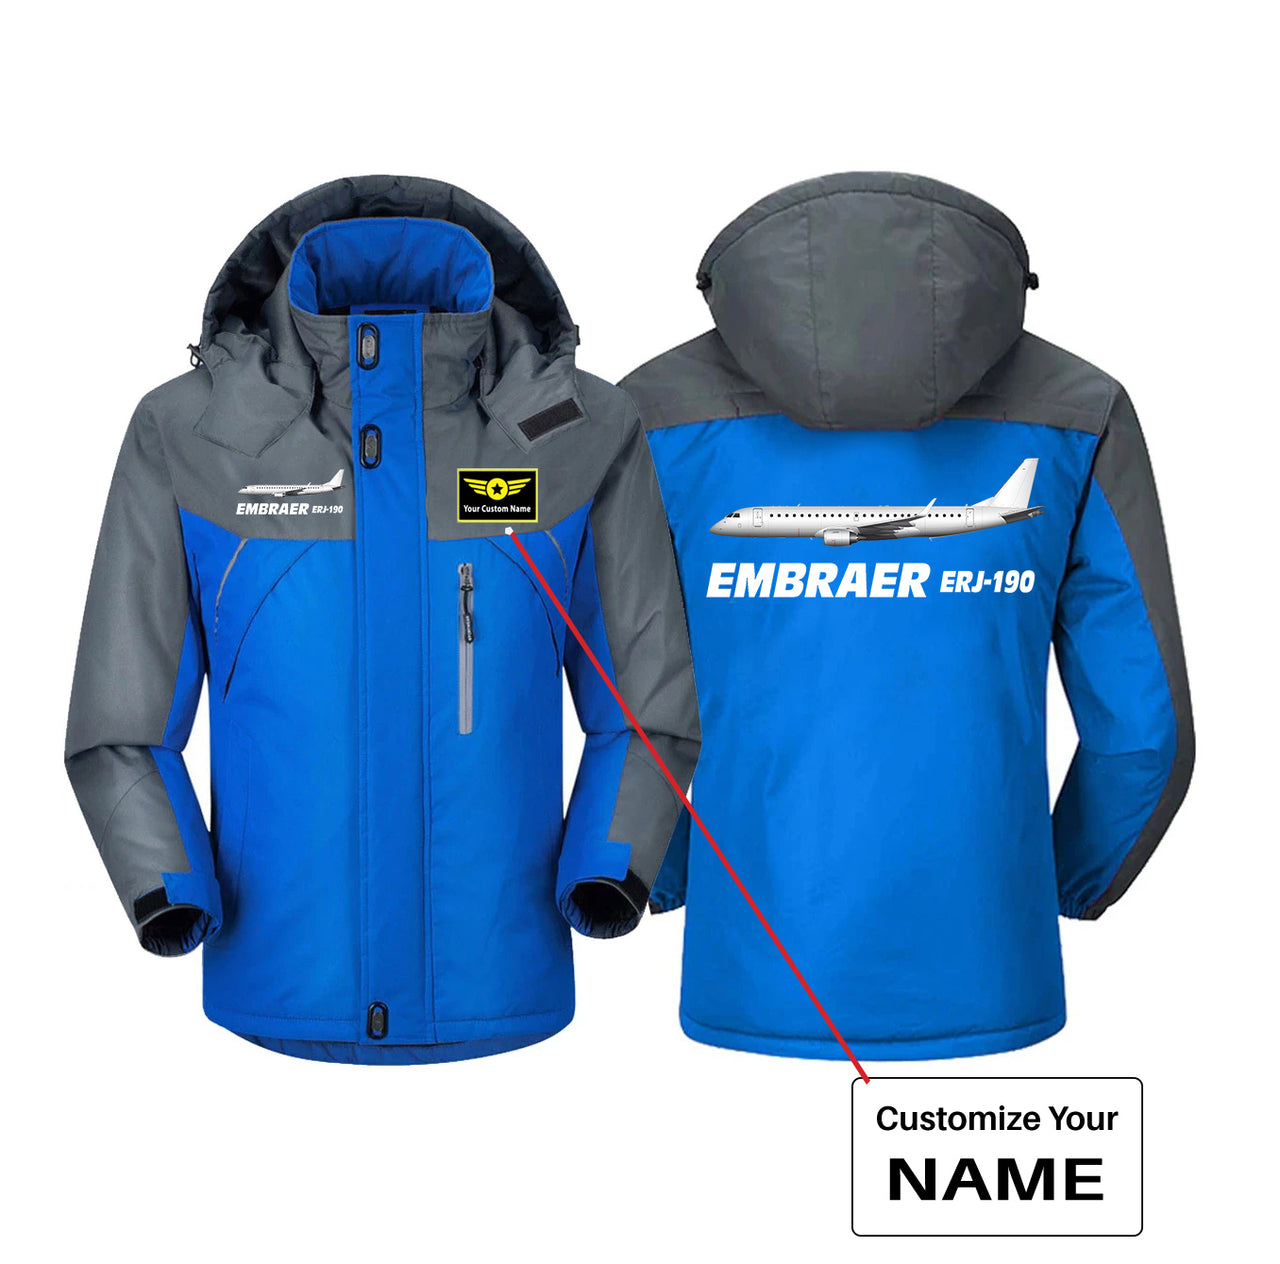 The Embraer ERJ-190 Designed Thick Winter Jackets